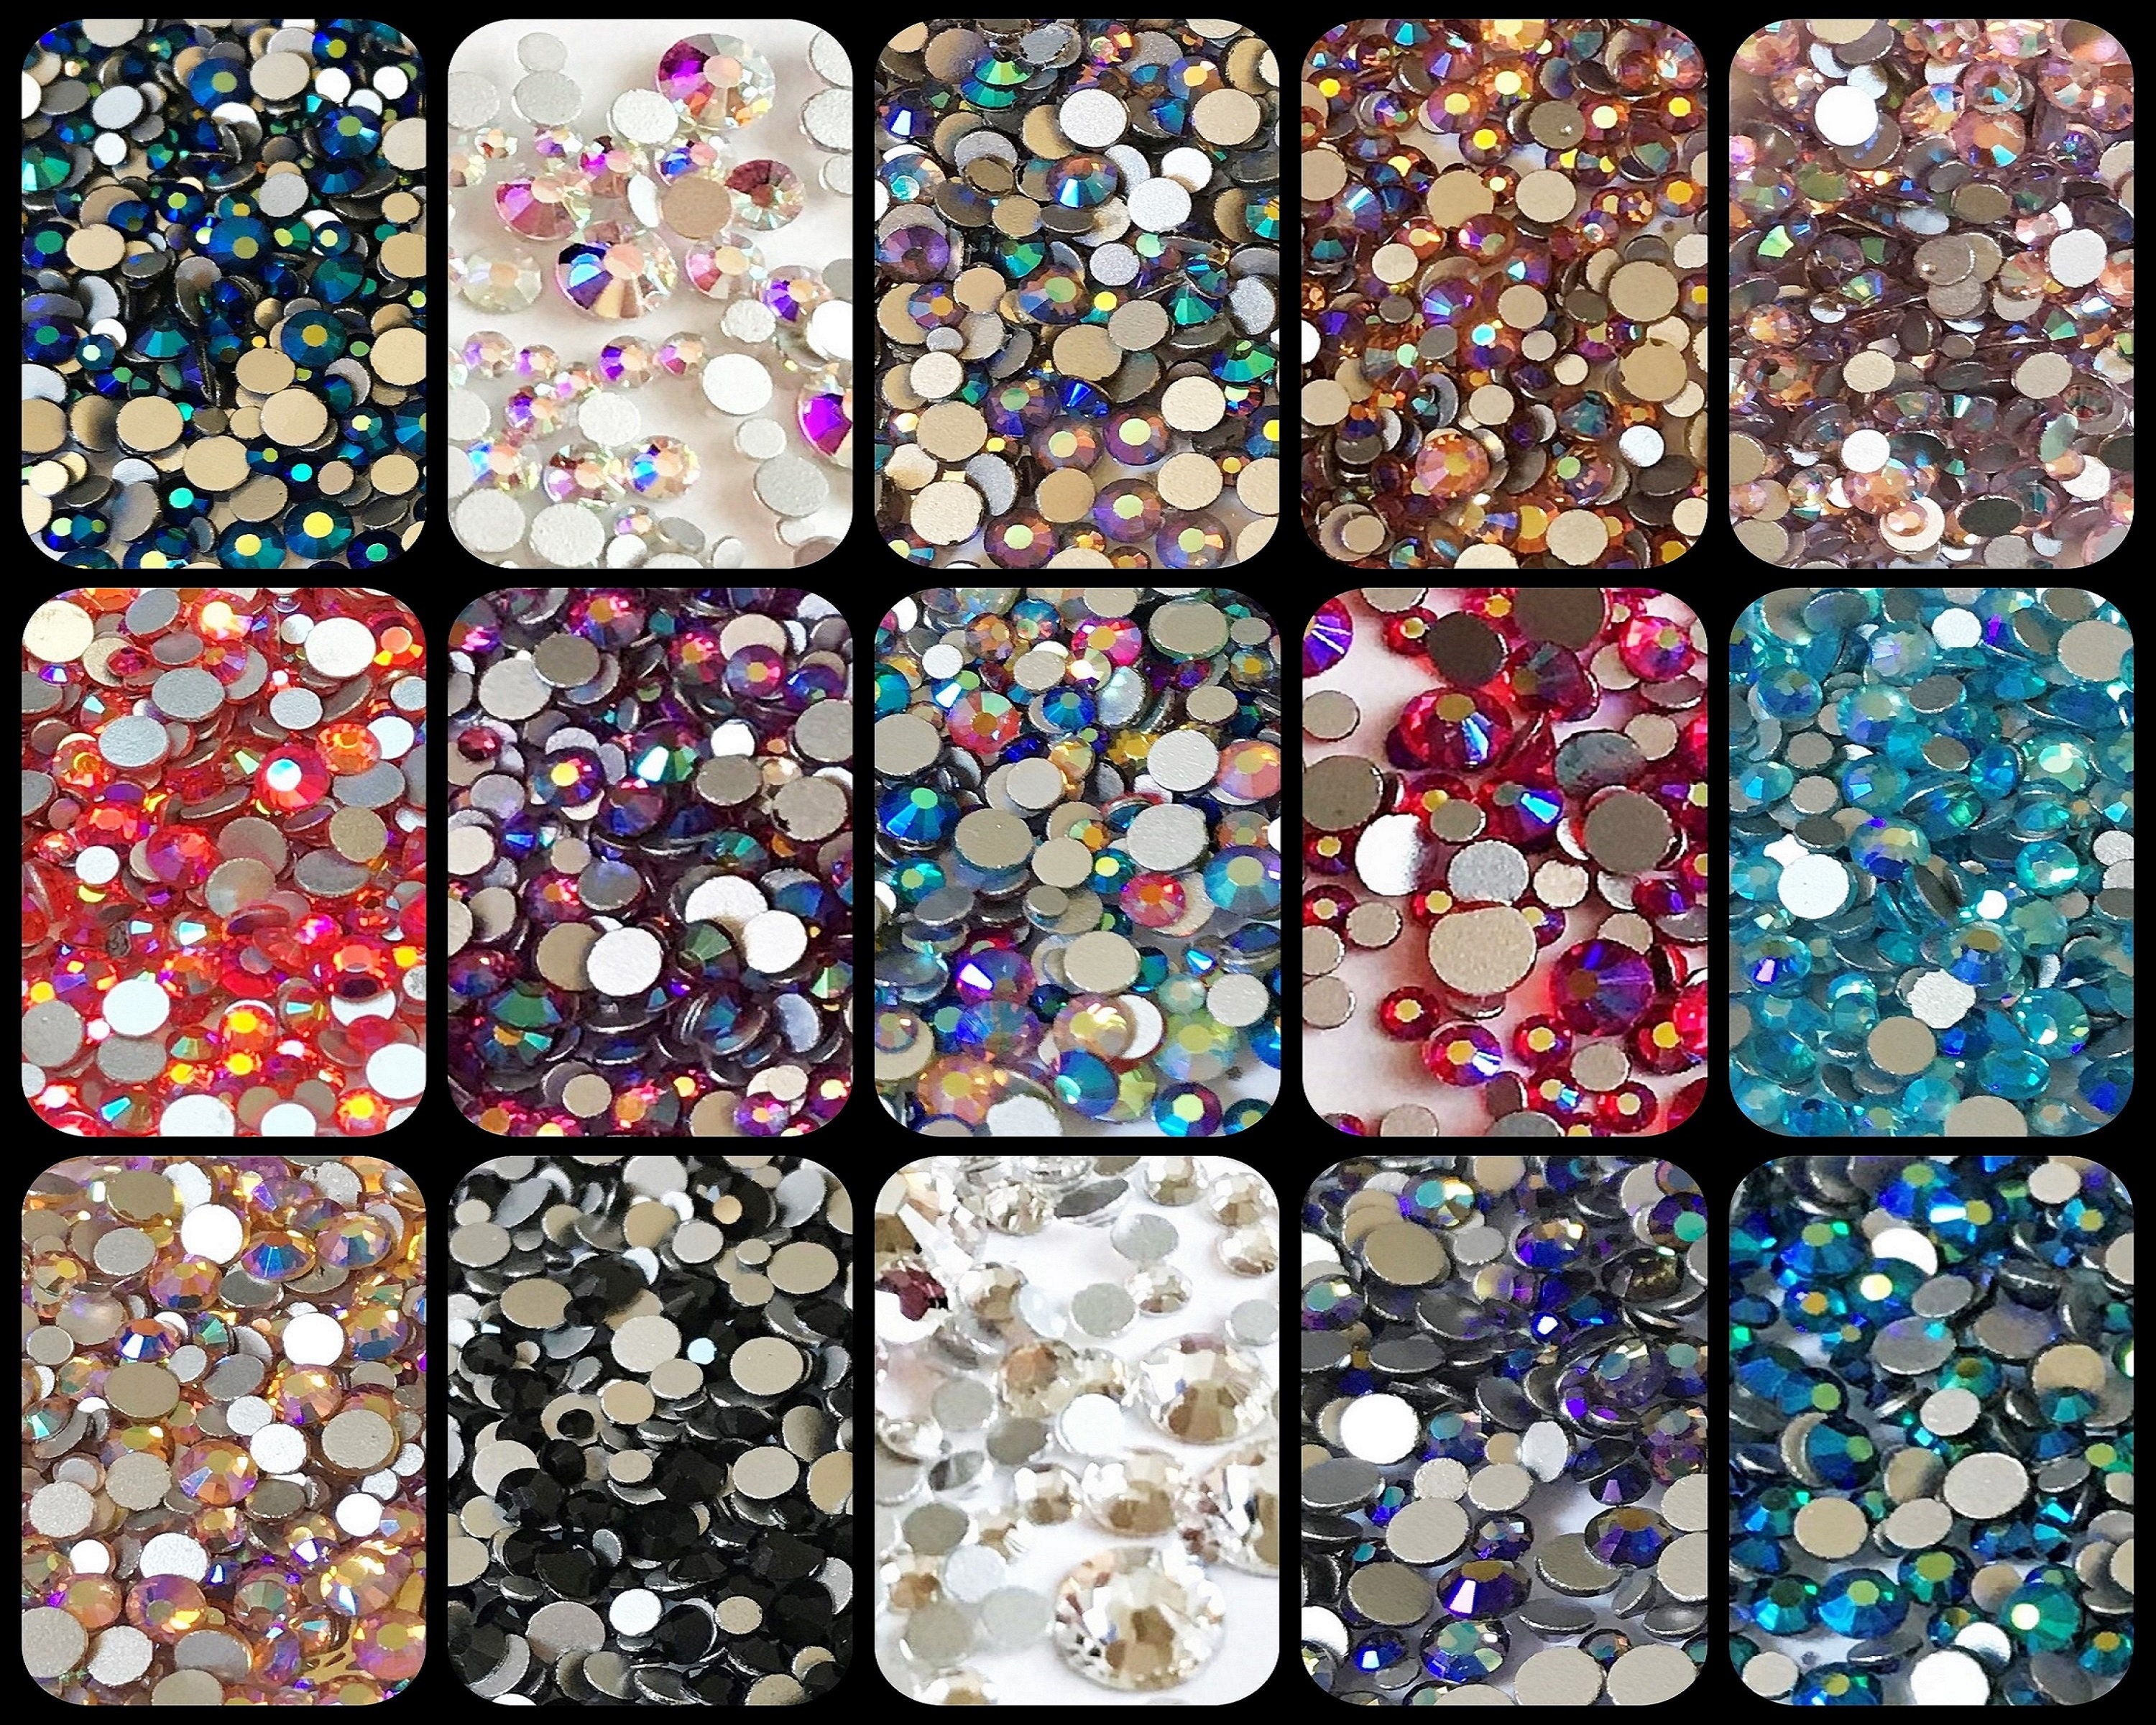 20g/Bag Mixed Colorful Stone for Nails 3D Stones for Nail Art